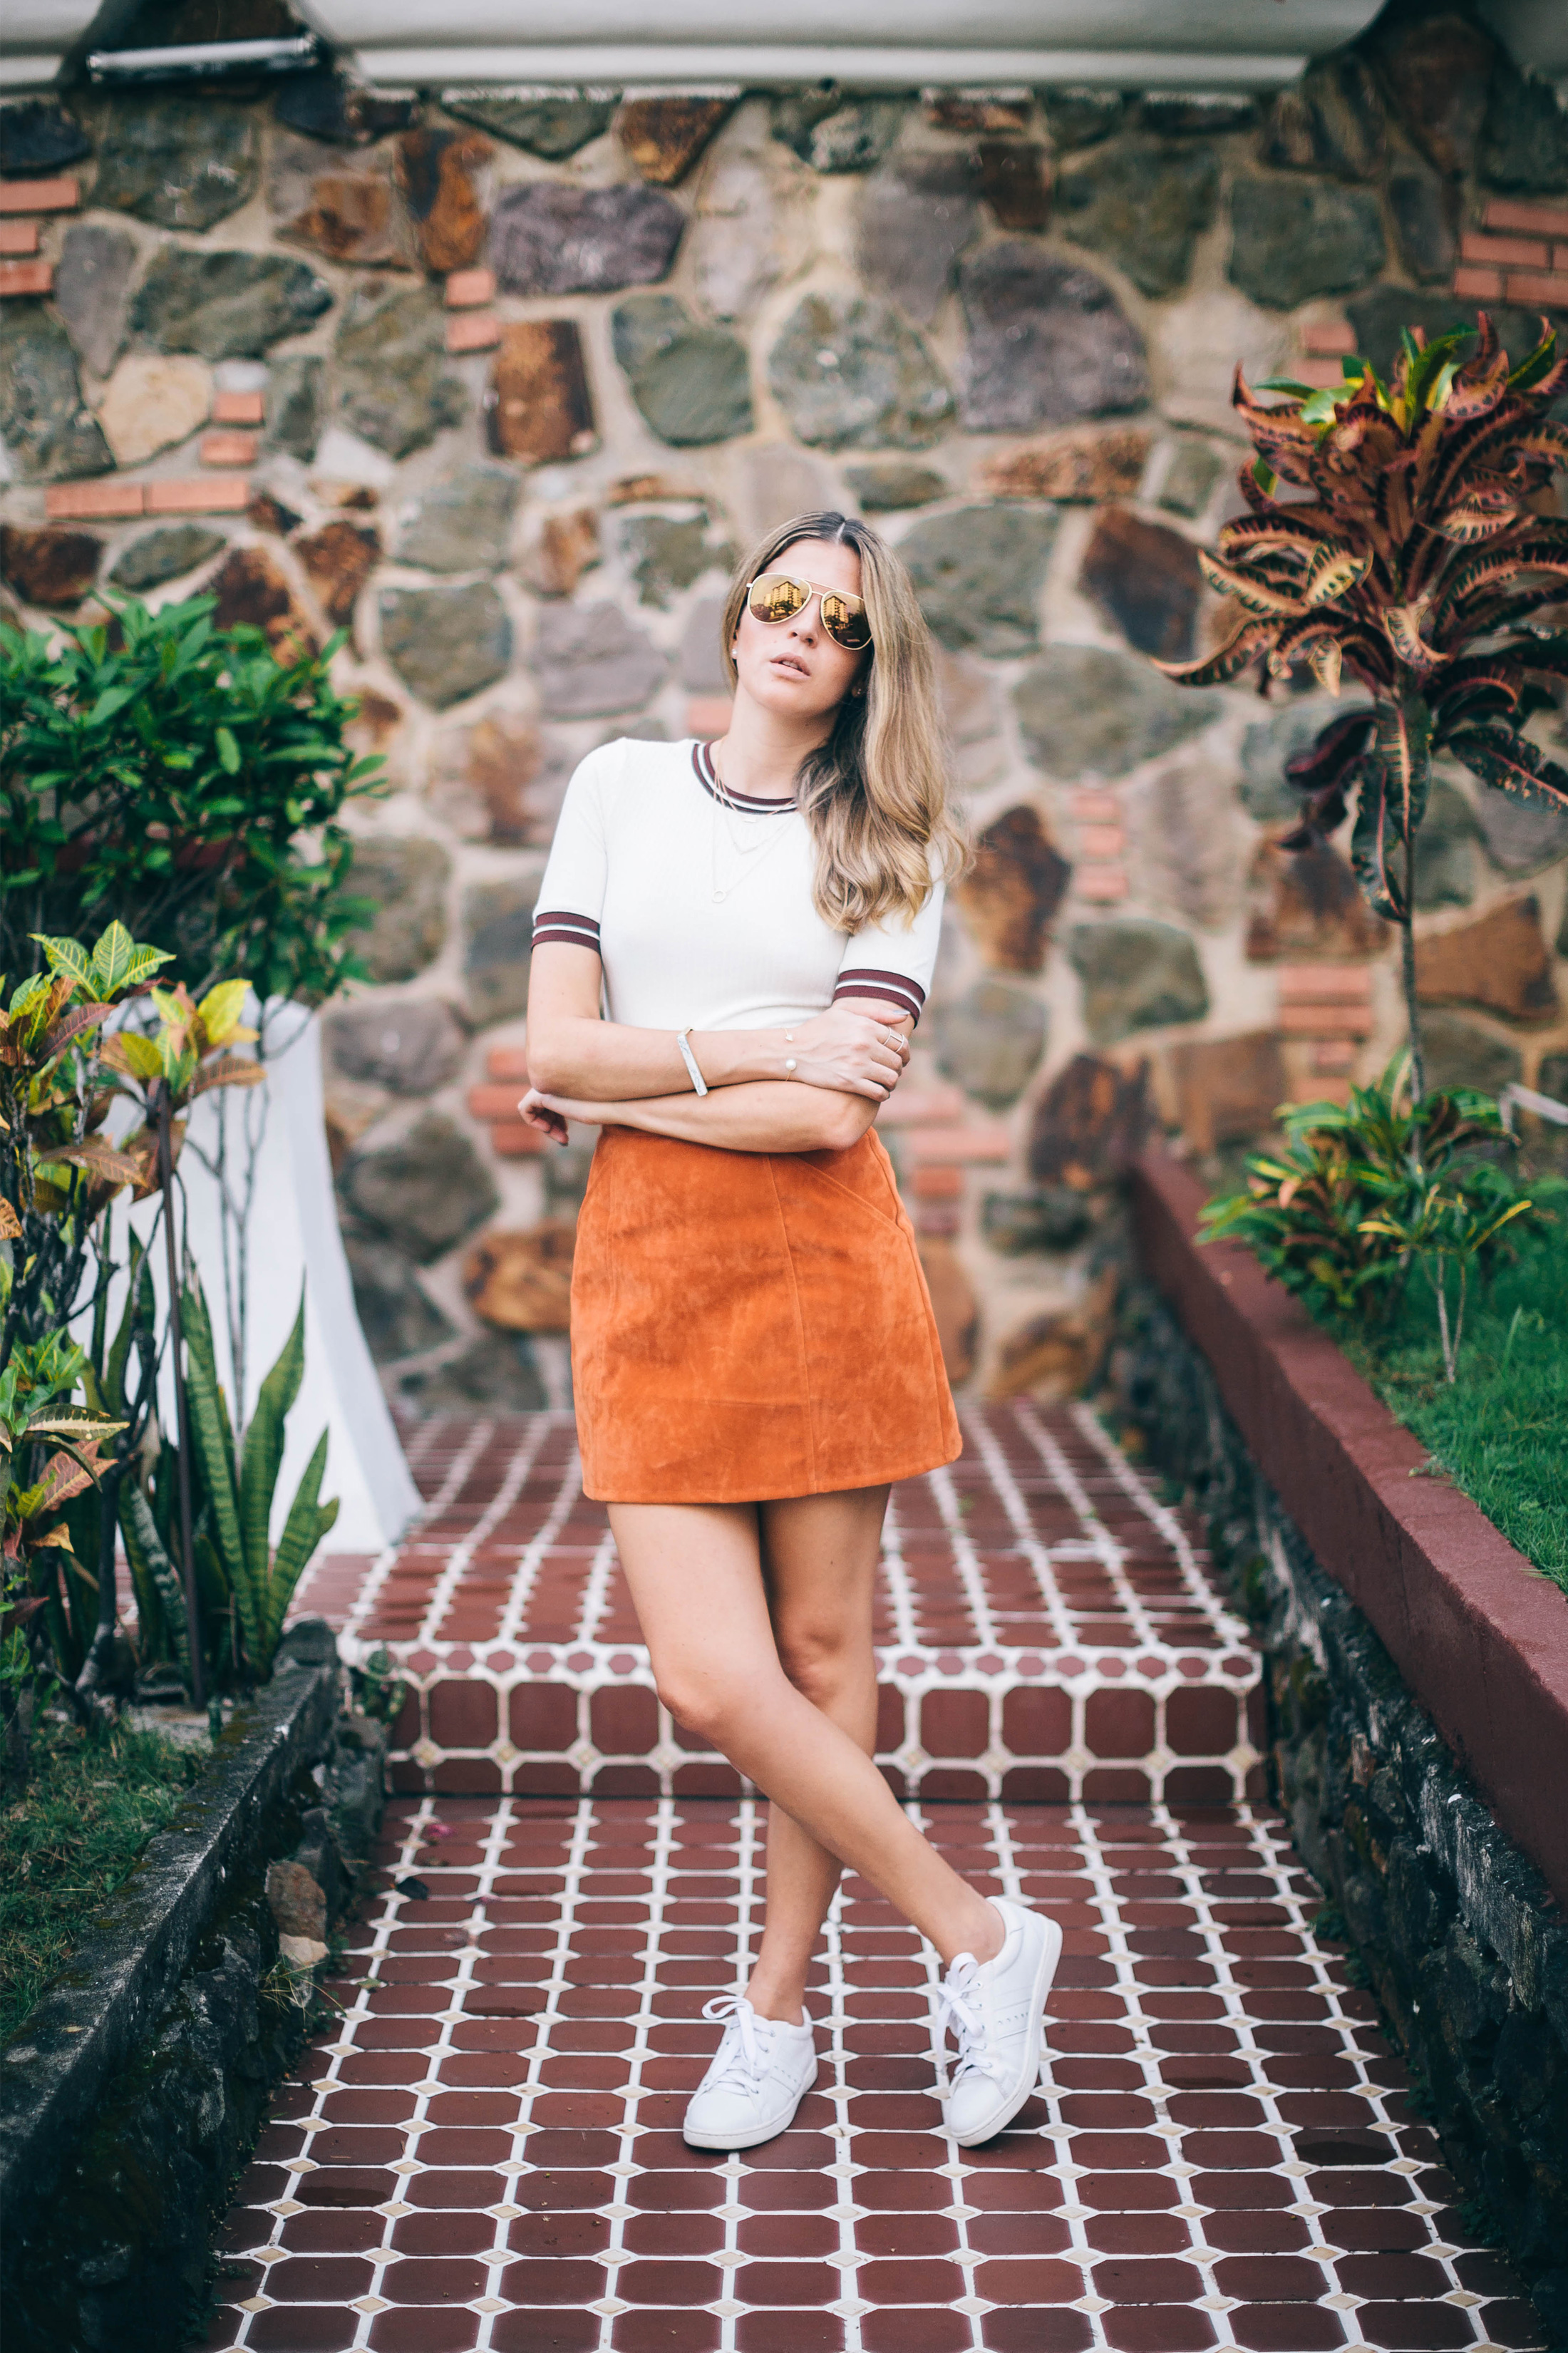 Maristella wears a suede skirt by Minkpink with H&M top and Saint Laurent aviators